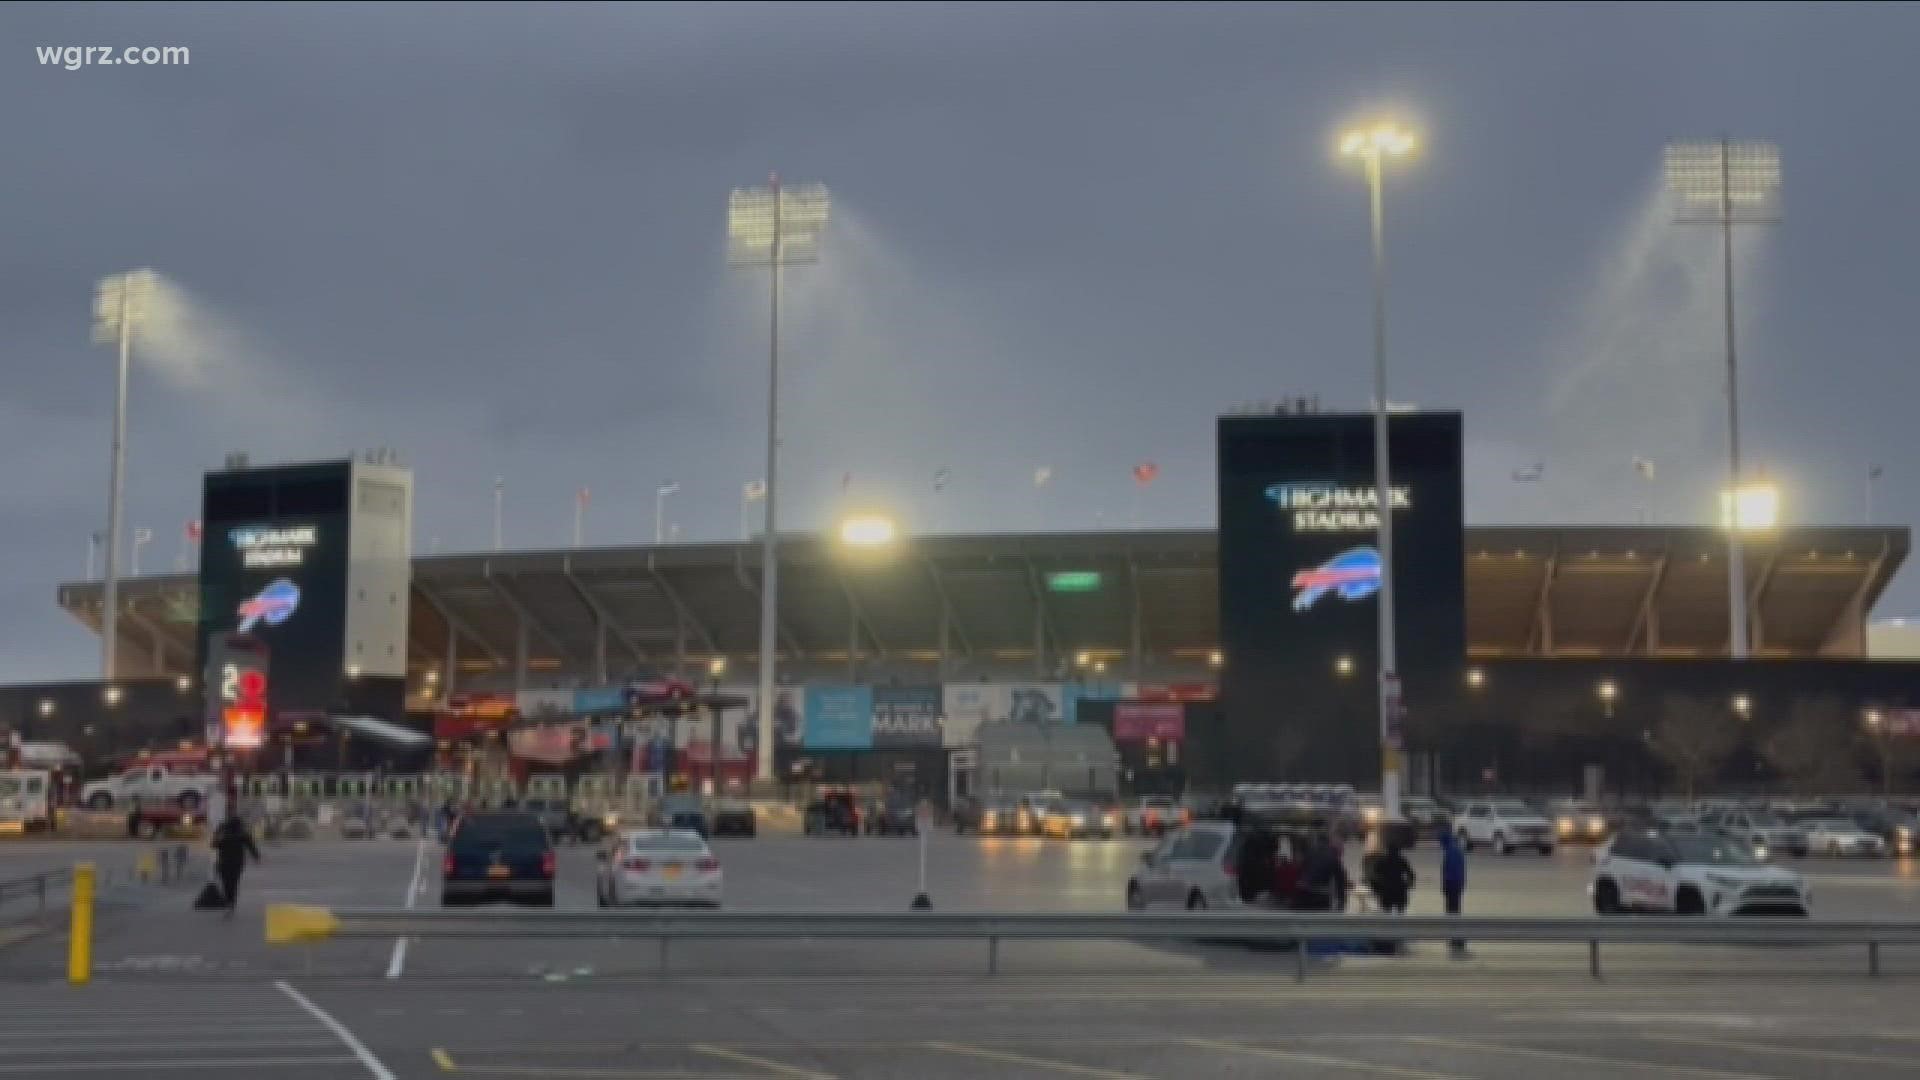 Cold weather hacks and tips to stay warm at the Bills game this Saturday night